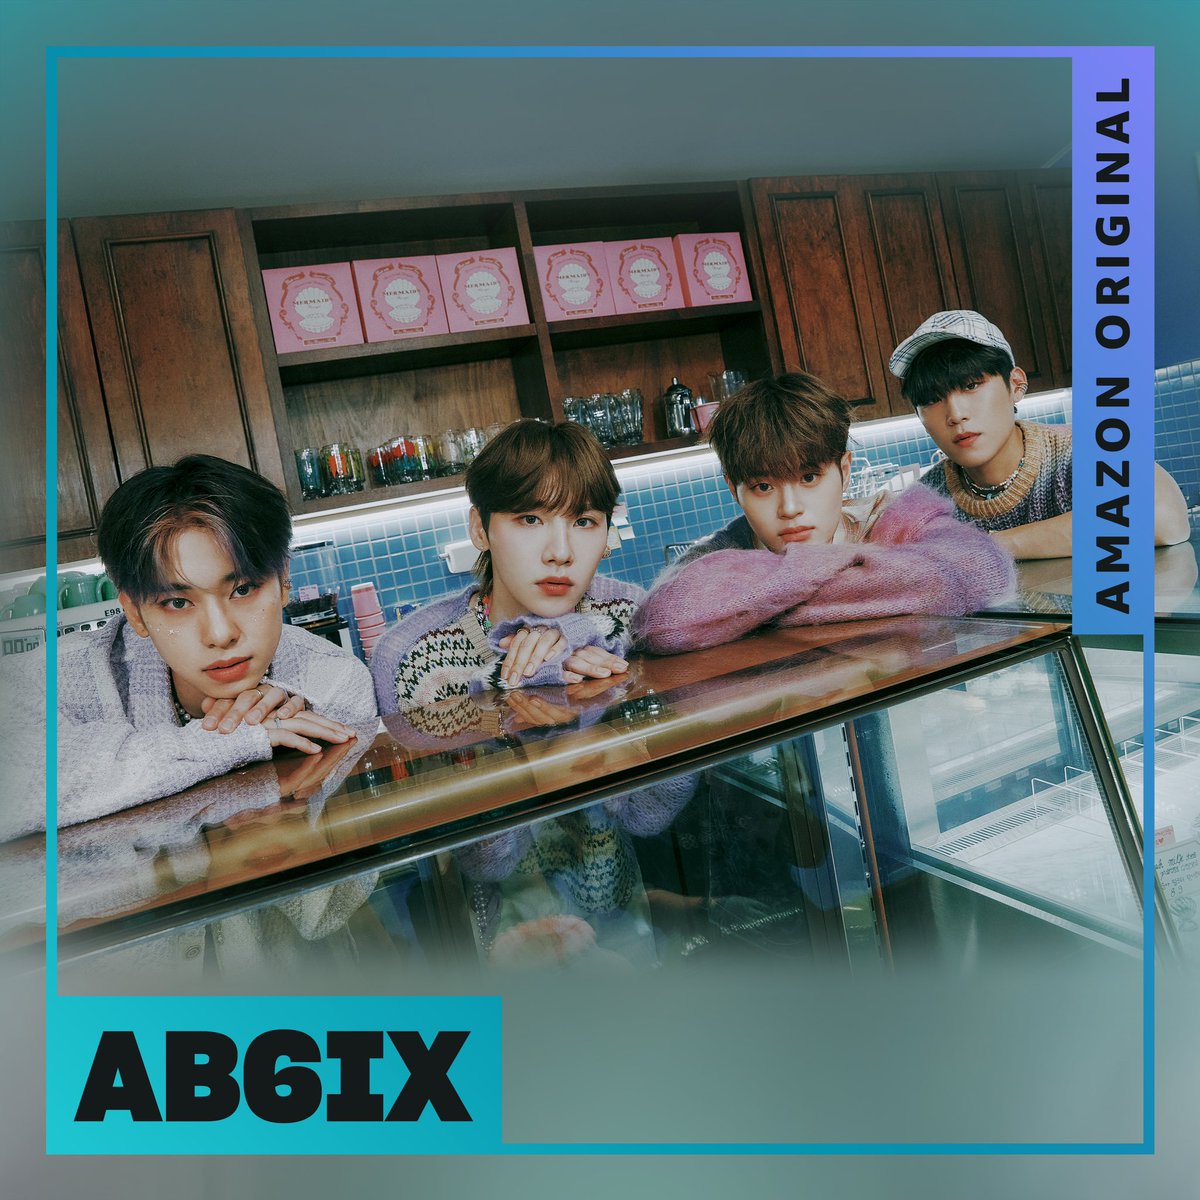 Image for [RELEASE] AB6IX's 'Sugarcoat (Studio Version) [Amazon Music Original]' was released through Amazon Music Japan starting today (3rd). @amazonmusicjp LINK: https://t.co/nuPSLSIfYY https://t.co/1qyfpHMMiO